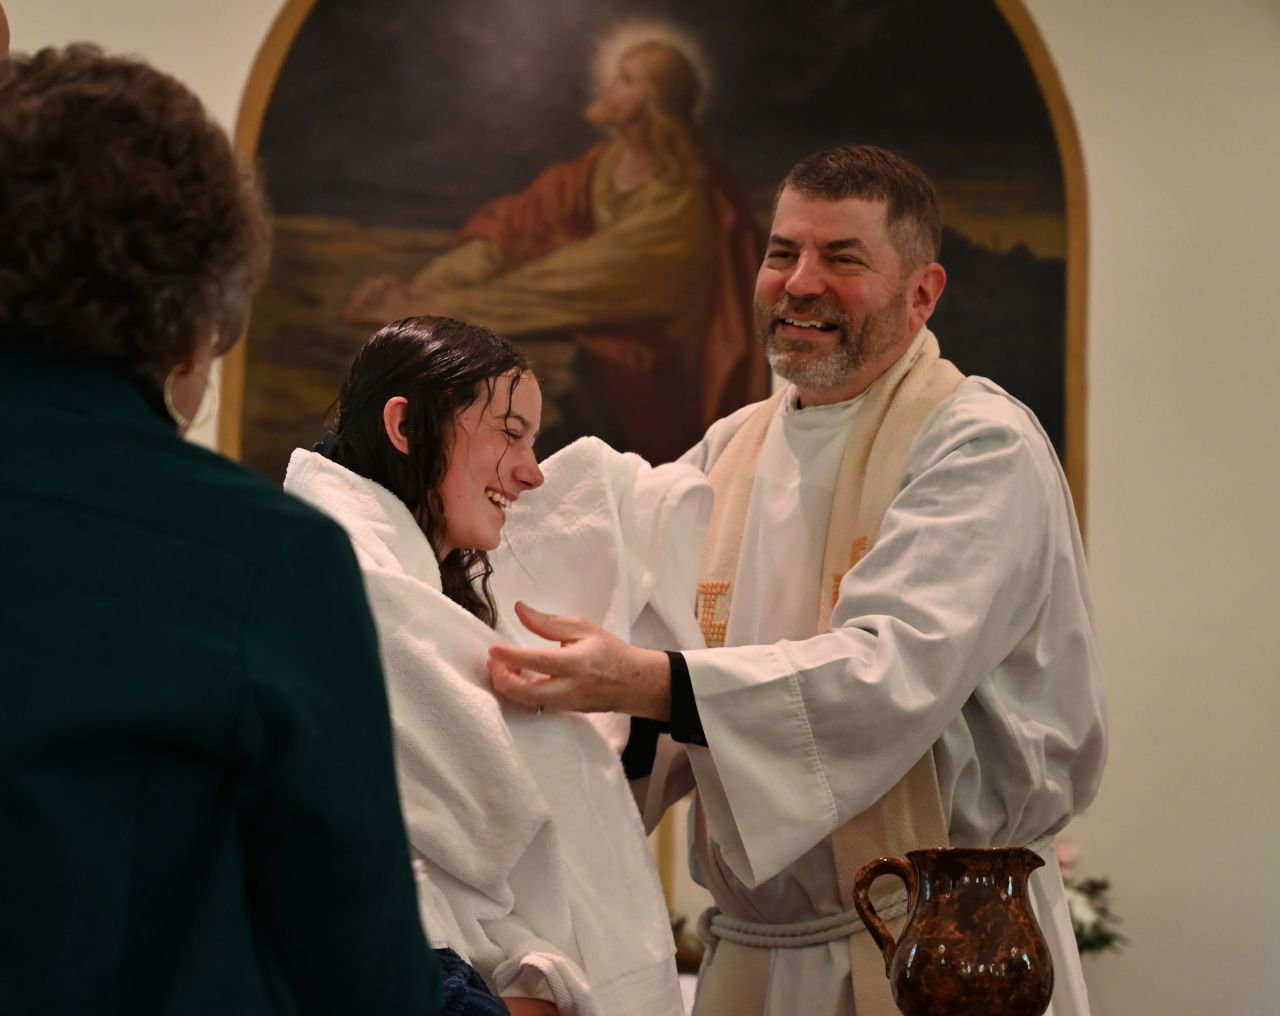 A dark-haired man prepares to hug a woman after her baptism.